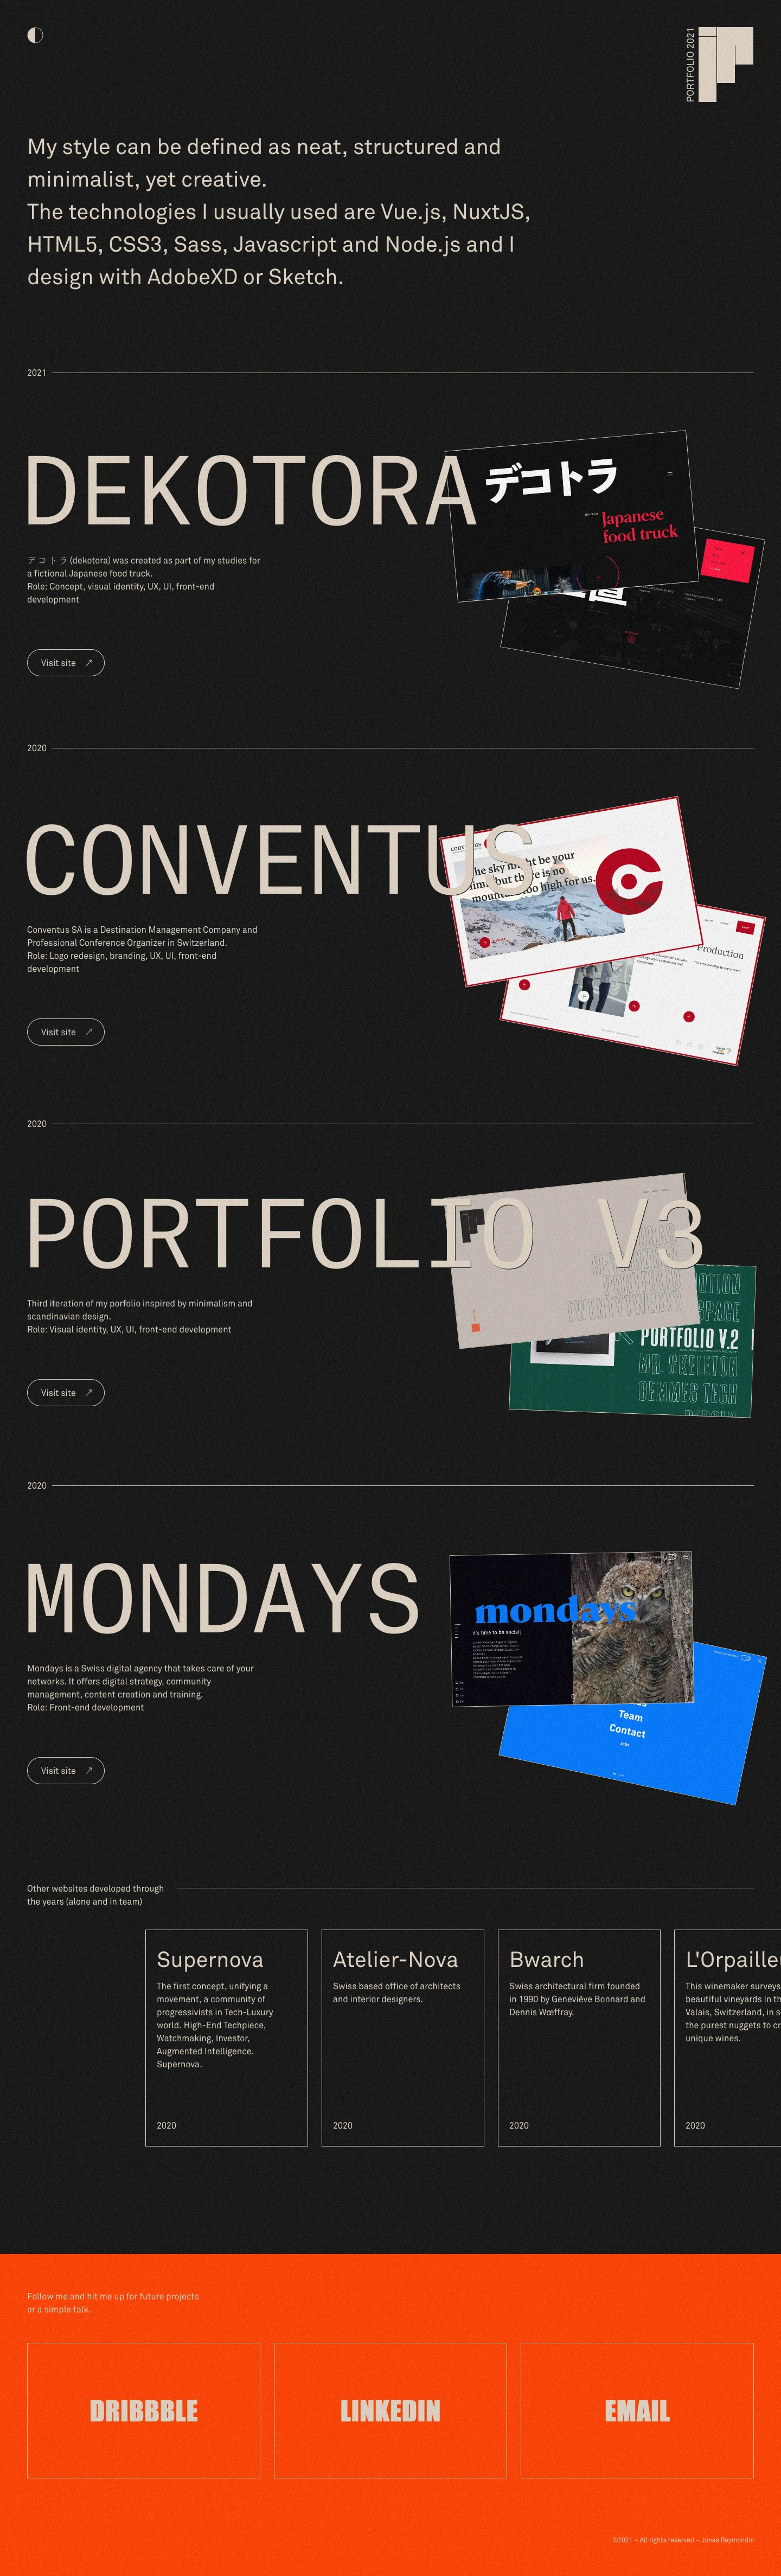 Jonas Reymondin Landing Page Example: Portfolio of Jonas Reymondin, a Creative Front-end Developer based in Switzerland. He works at bebold and is always looking for exciting projects.